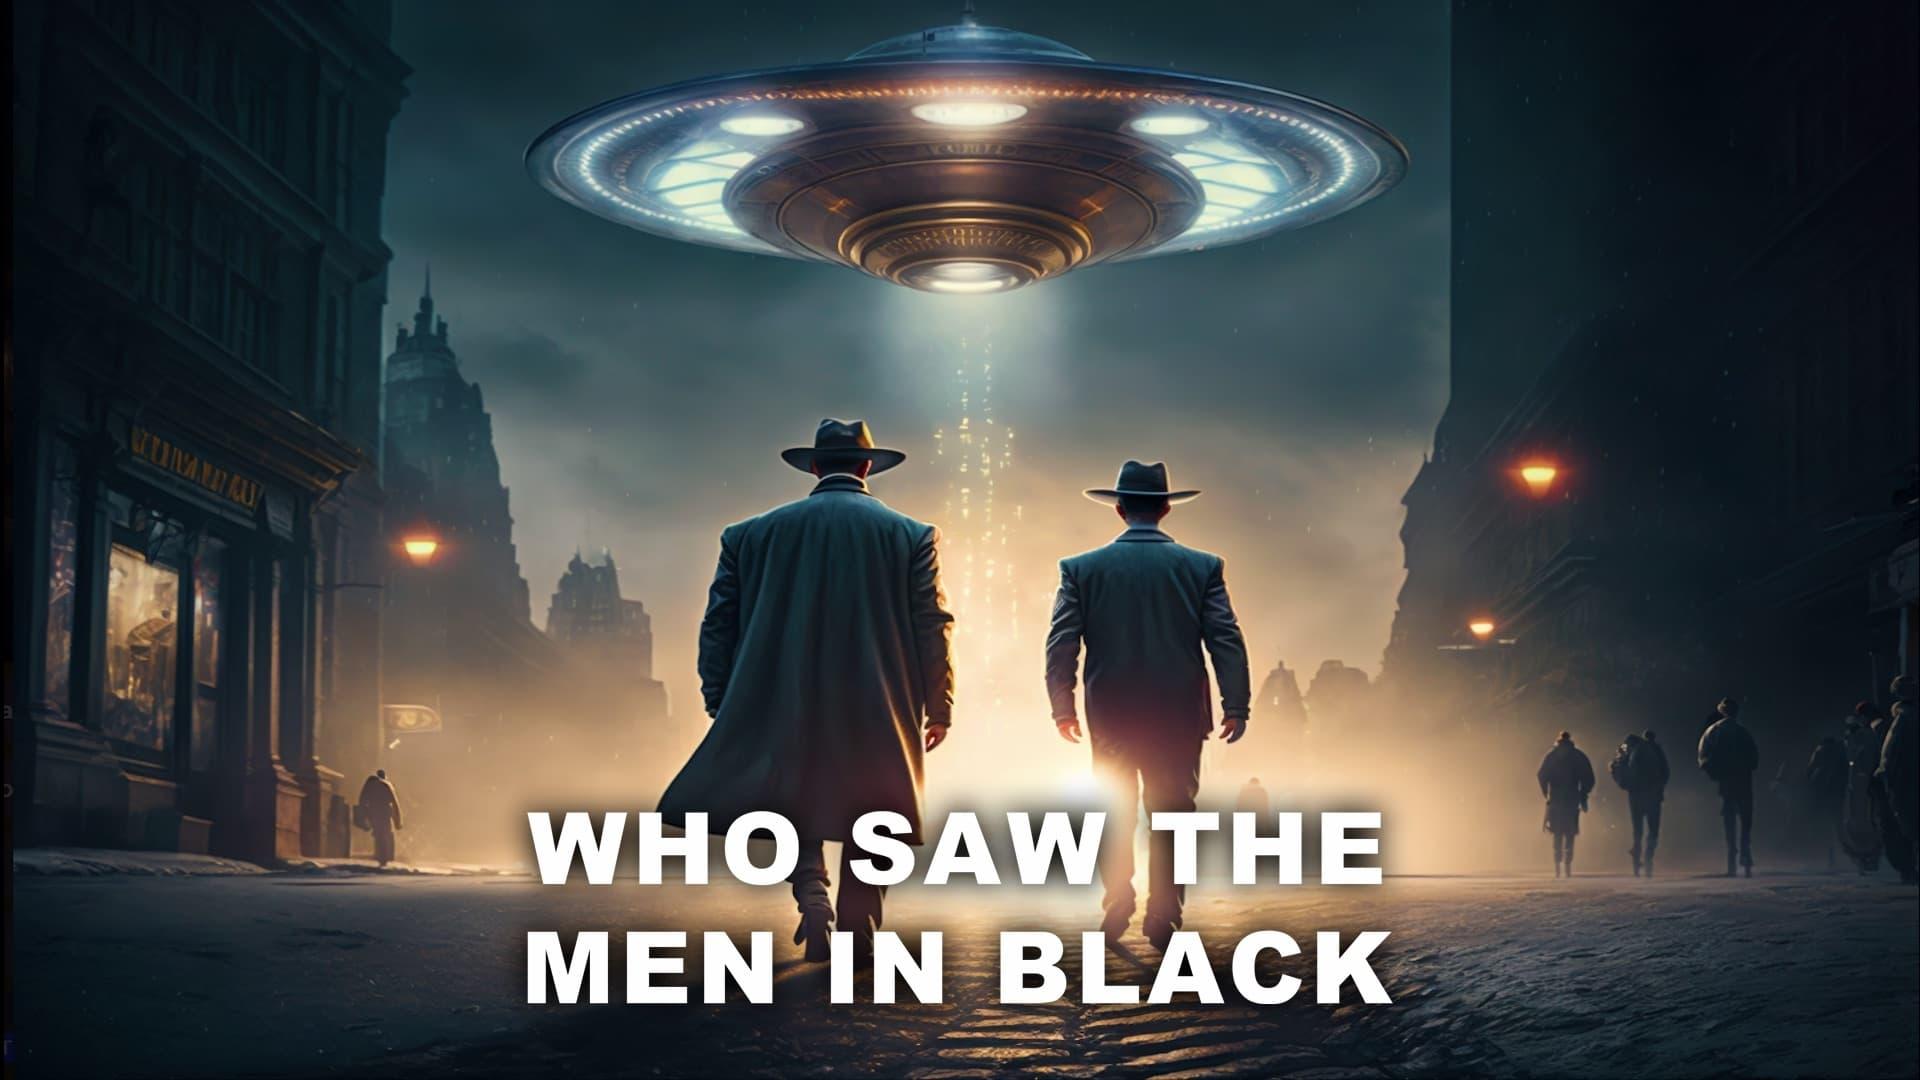 Who Saw the Men in Black backdrop